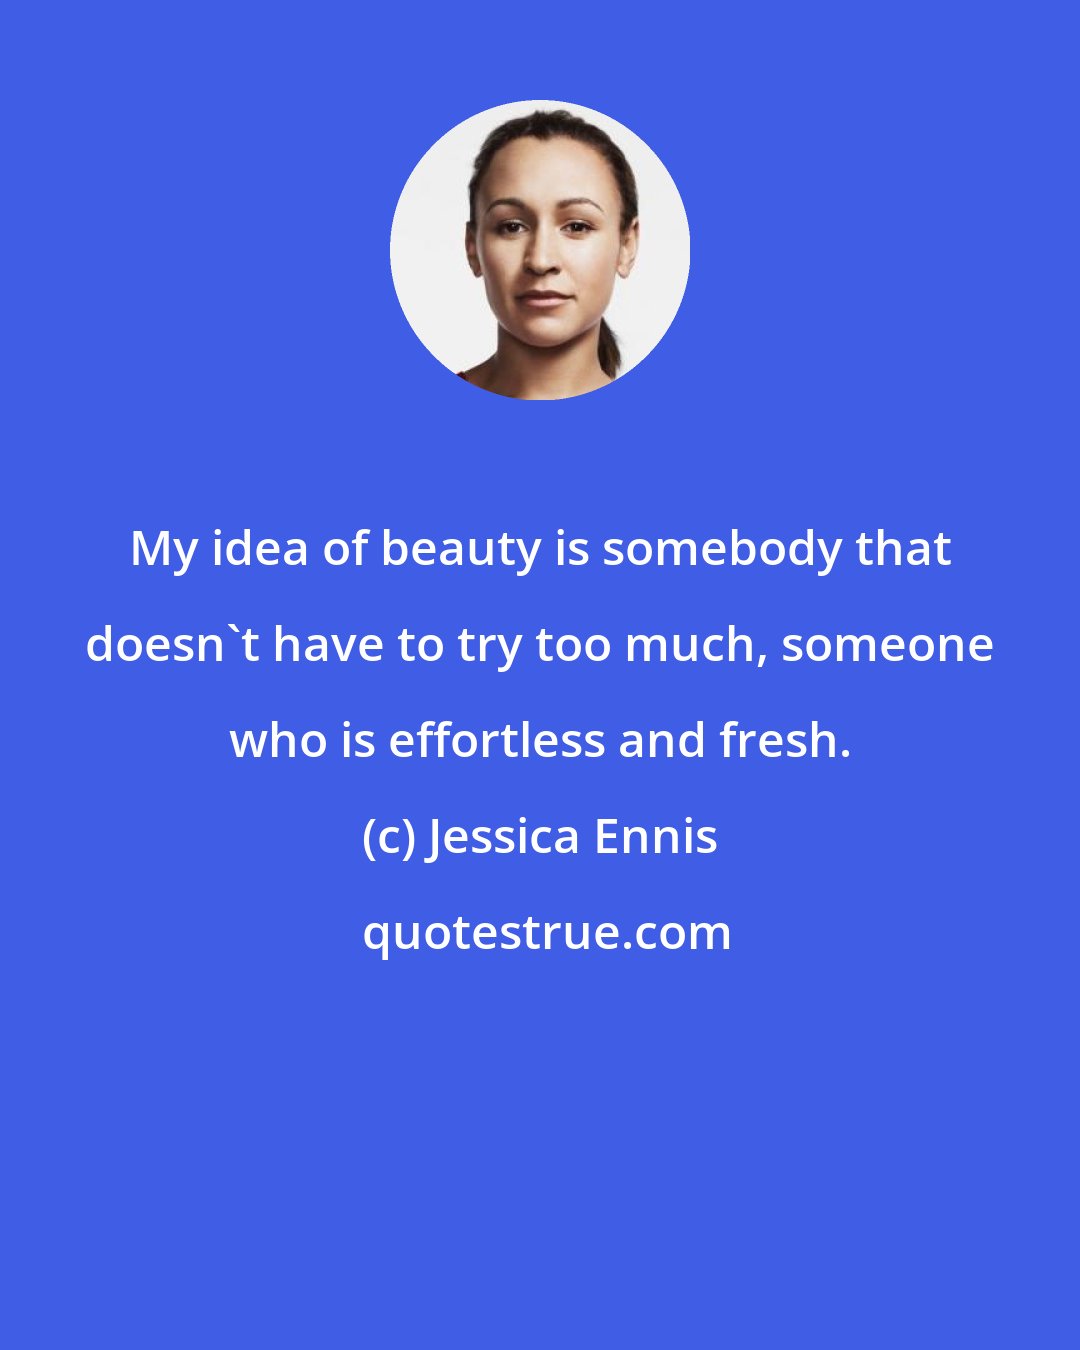 Jessica Ennis: My idea of beauty is somebody that doesn't have to try too much, someone who is effortless and fresh.